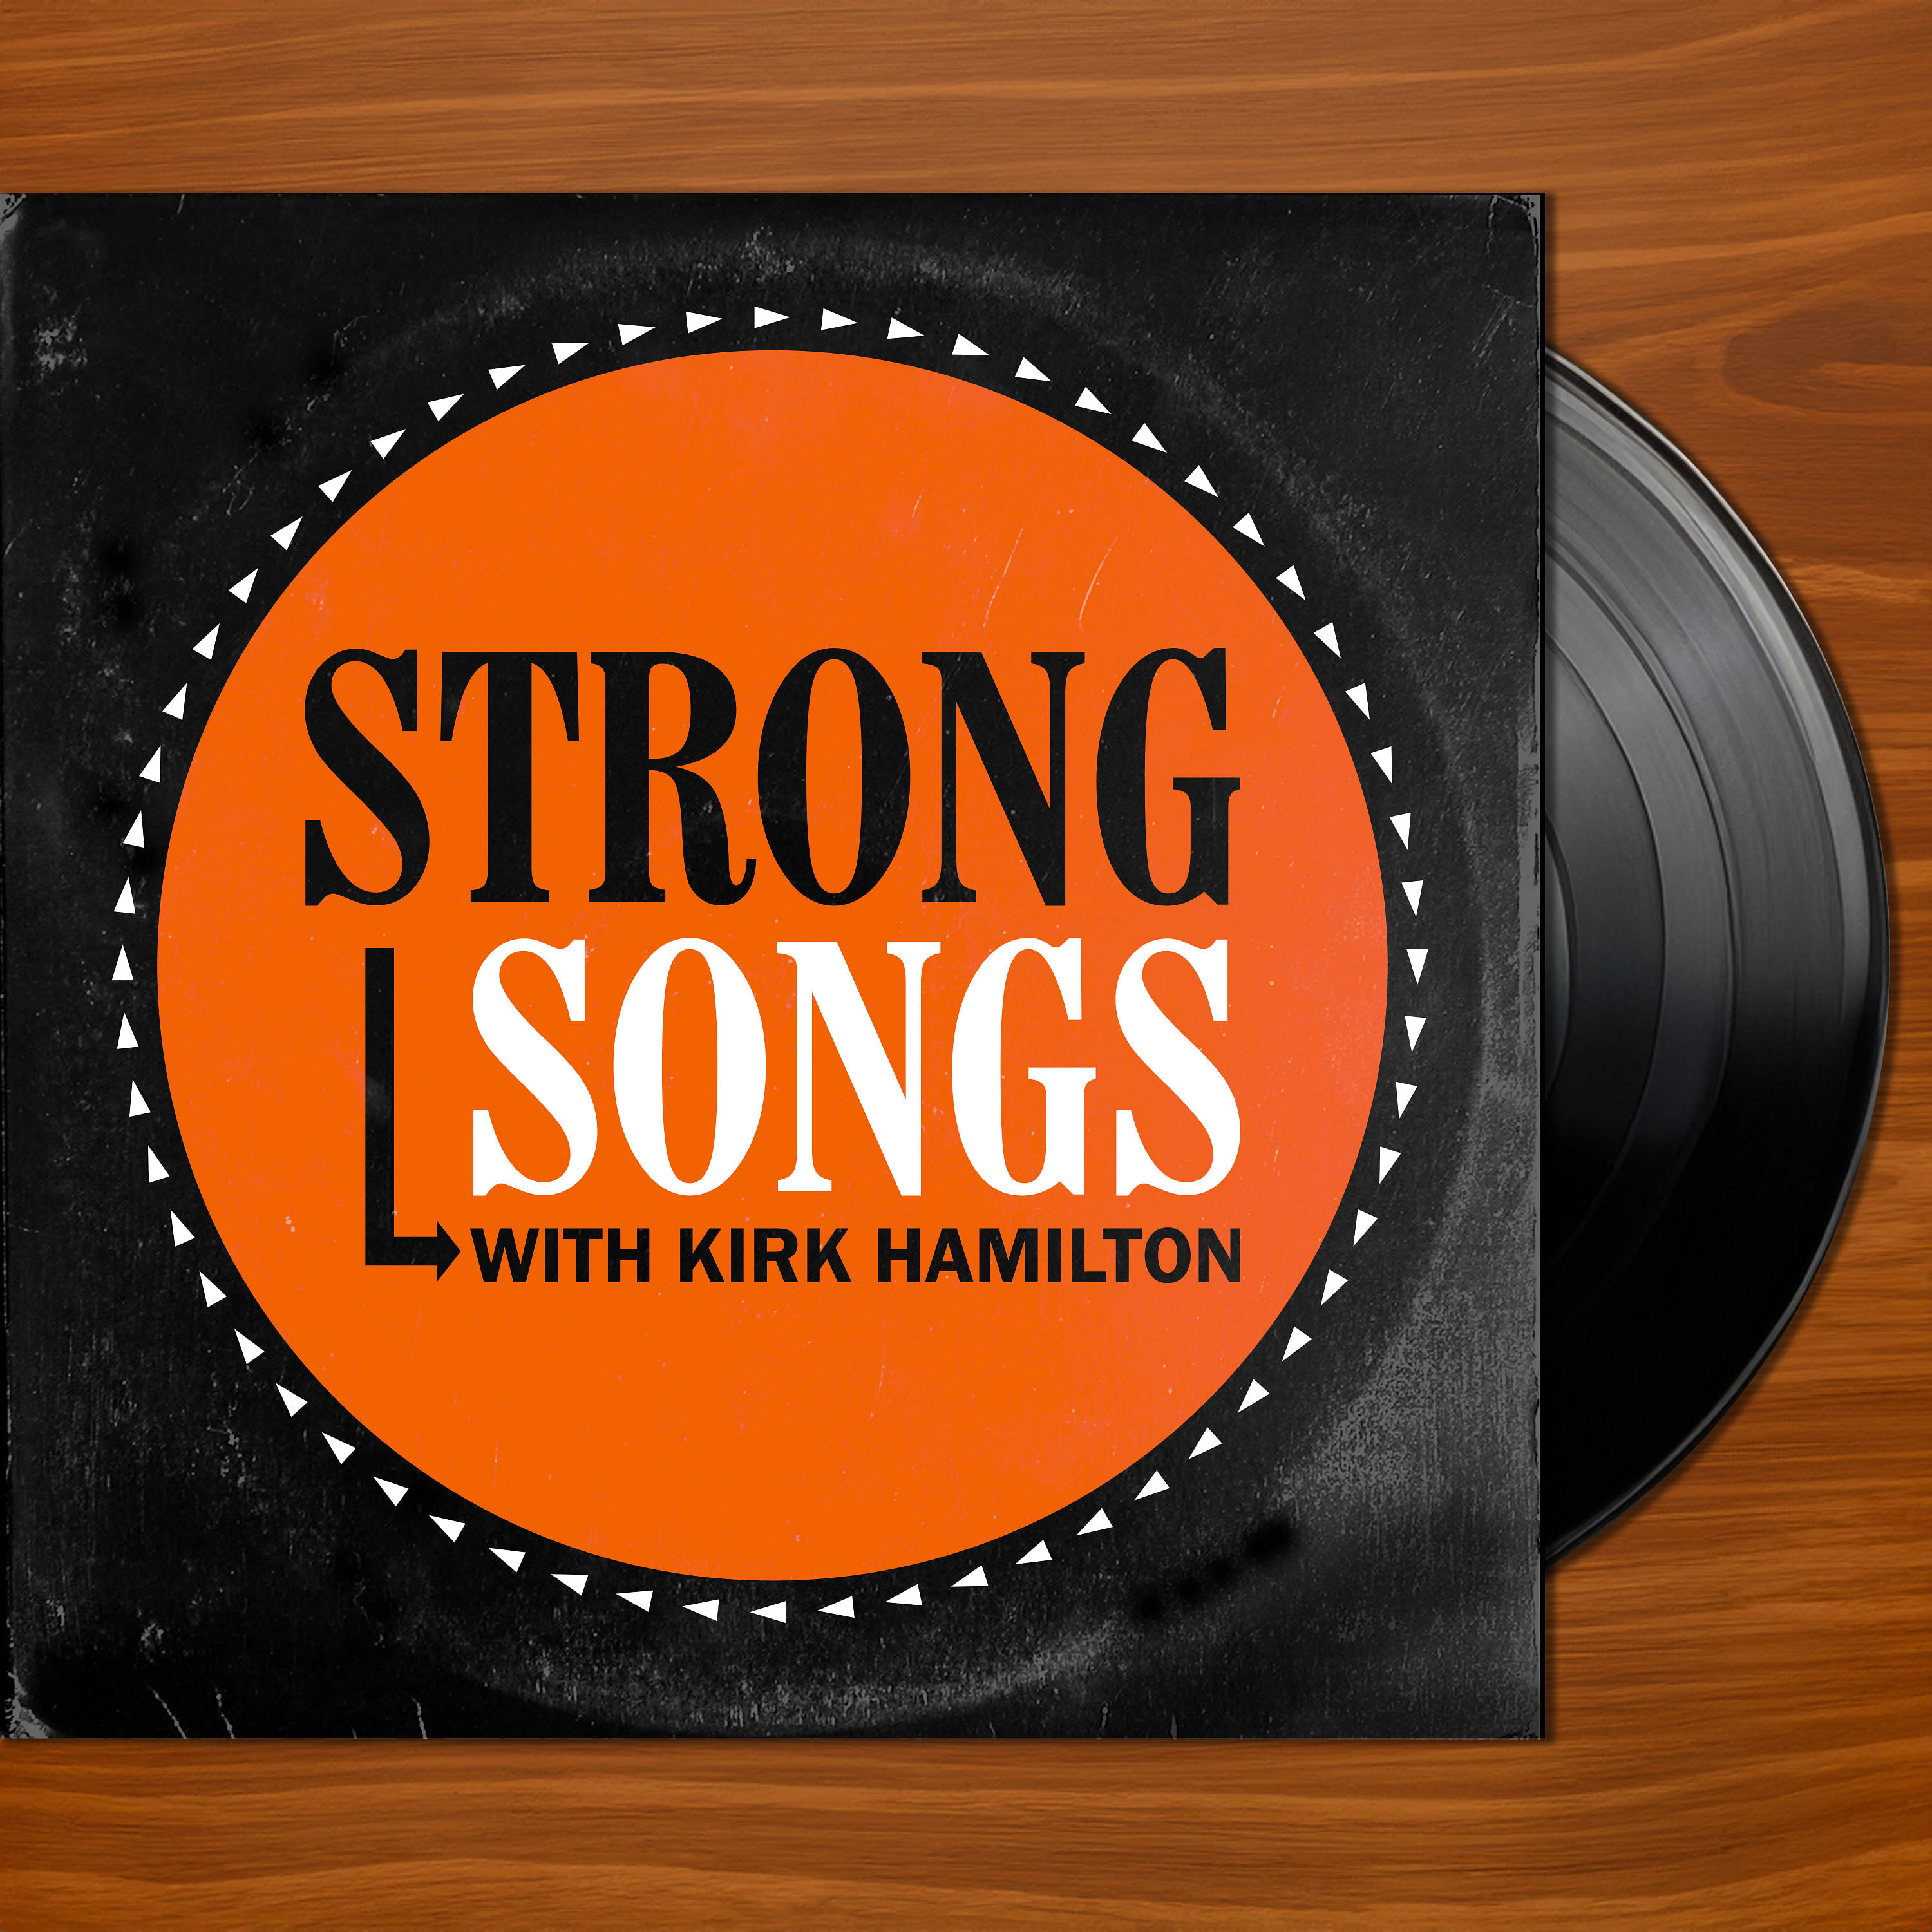 The cover of the podcast Strong Songs